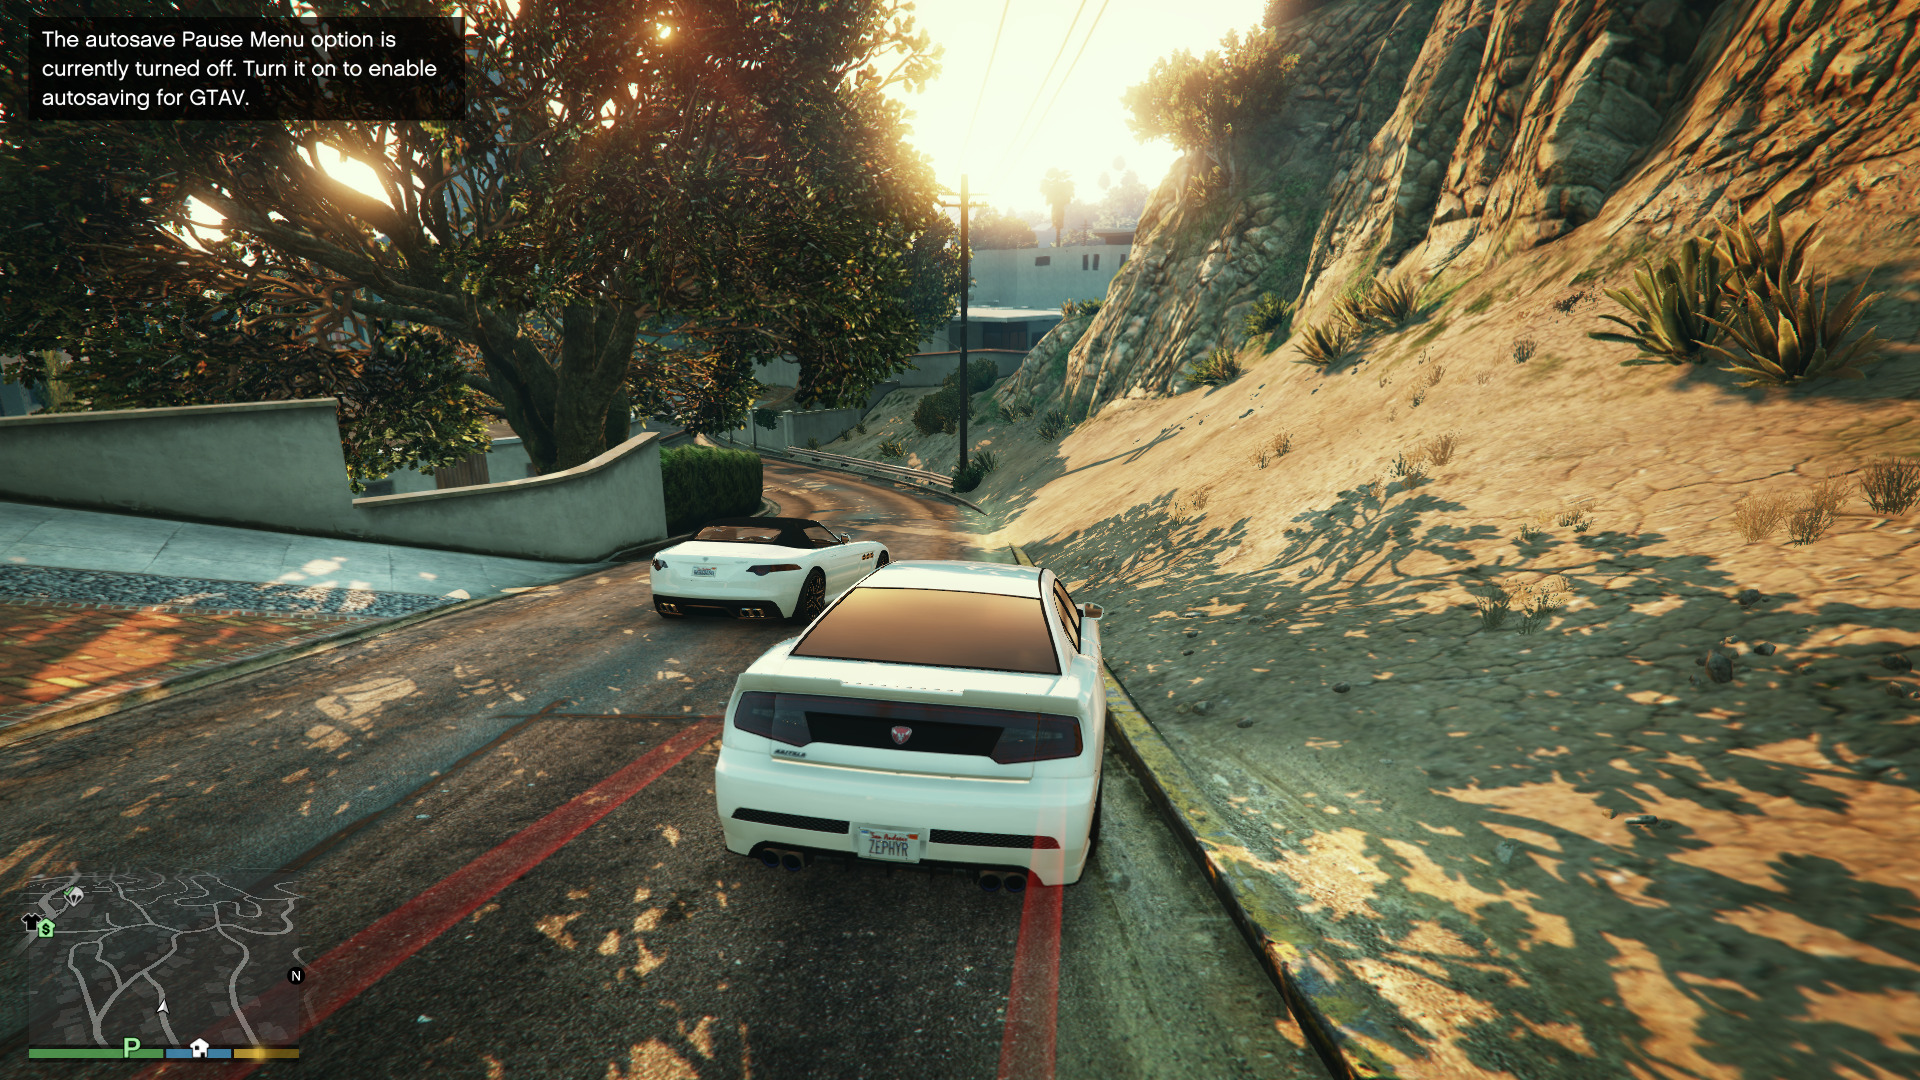 Increase Special Ability of Franklin in GTA V by driving aggressively